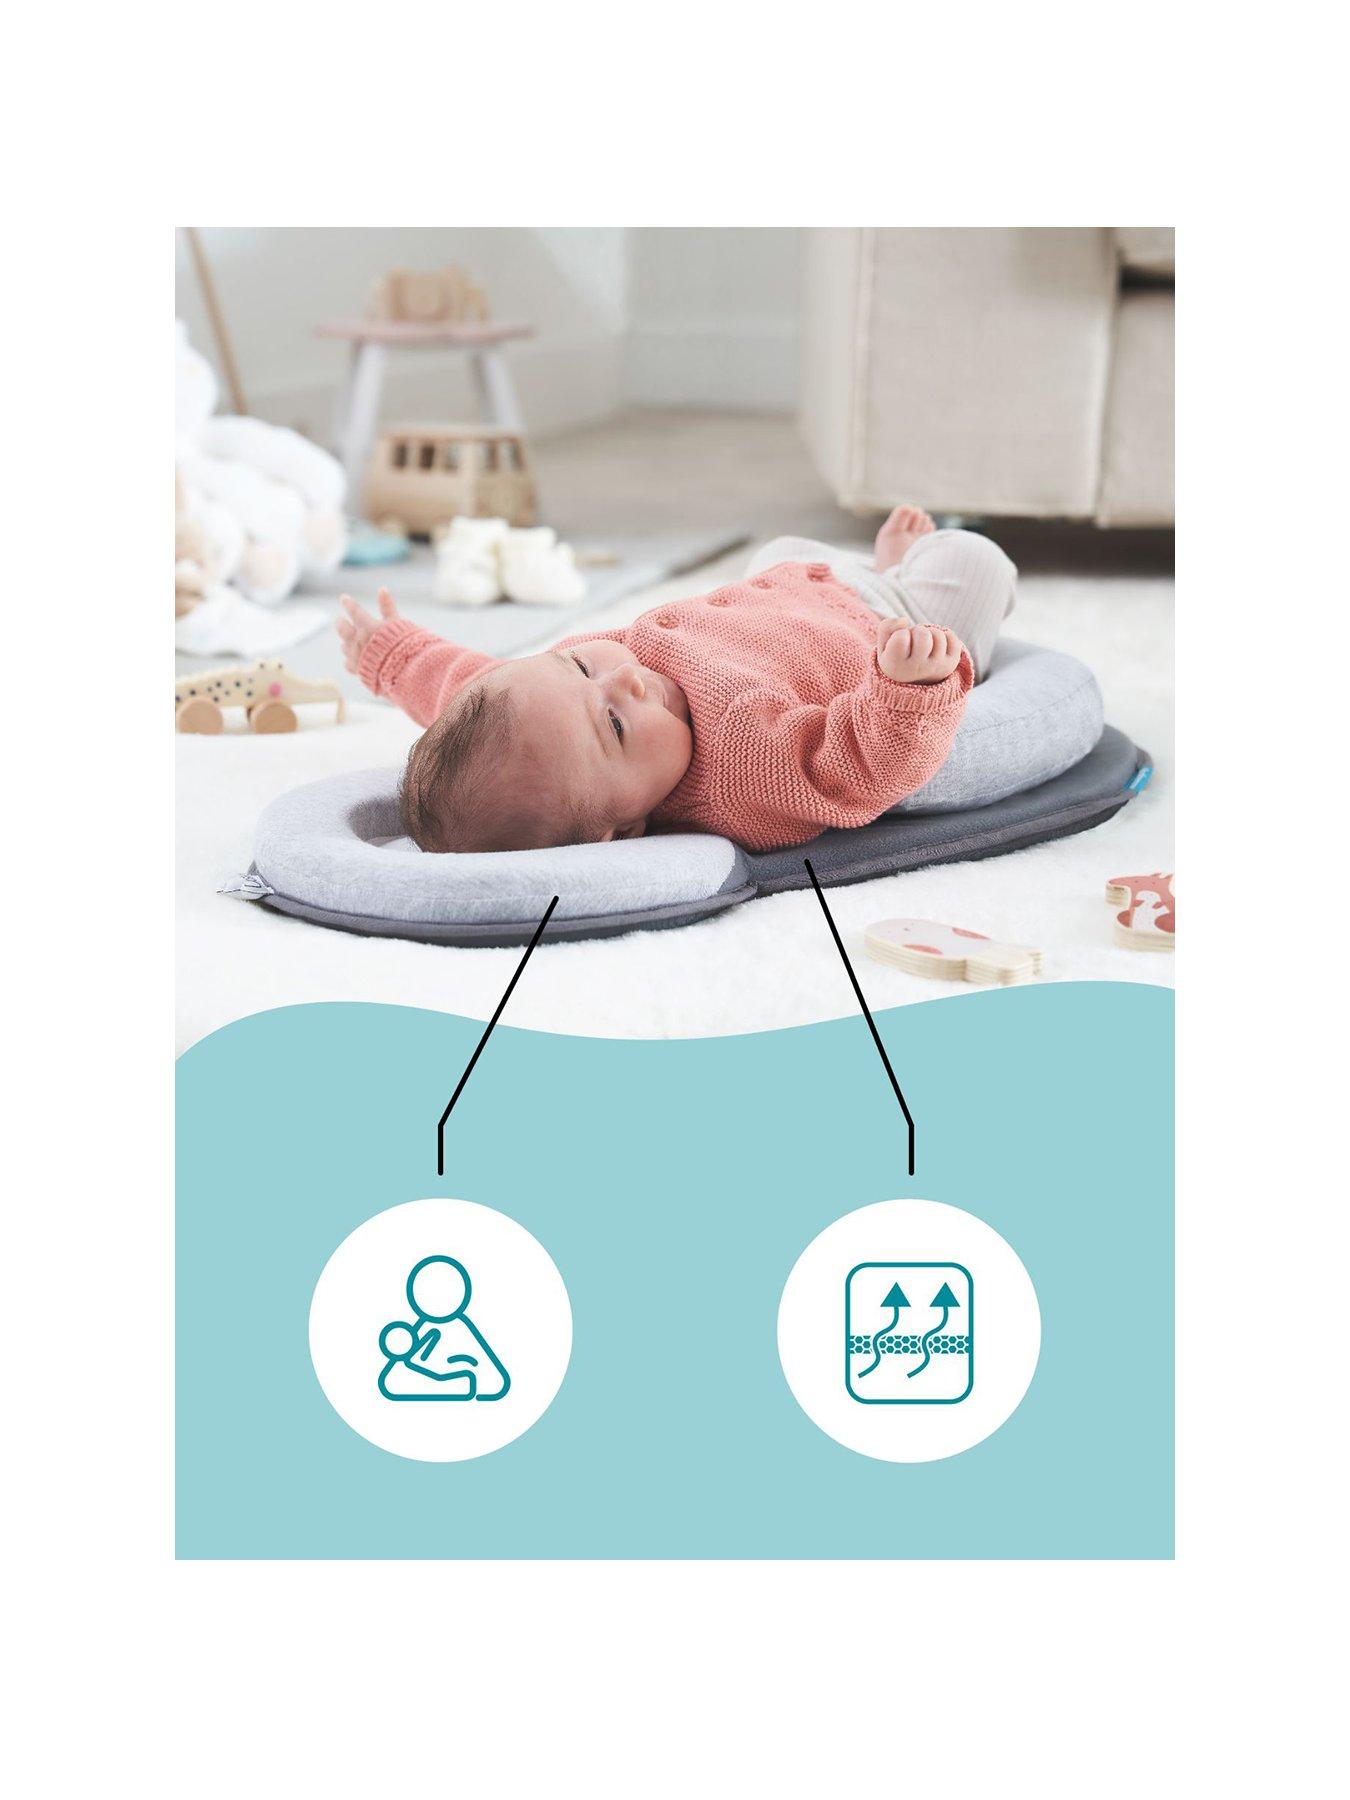 ComfyBaby Baby Nest Bed Incline Baby Lounger I Best Baby Lounger Nest